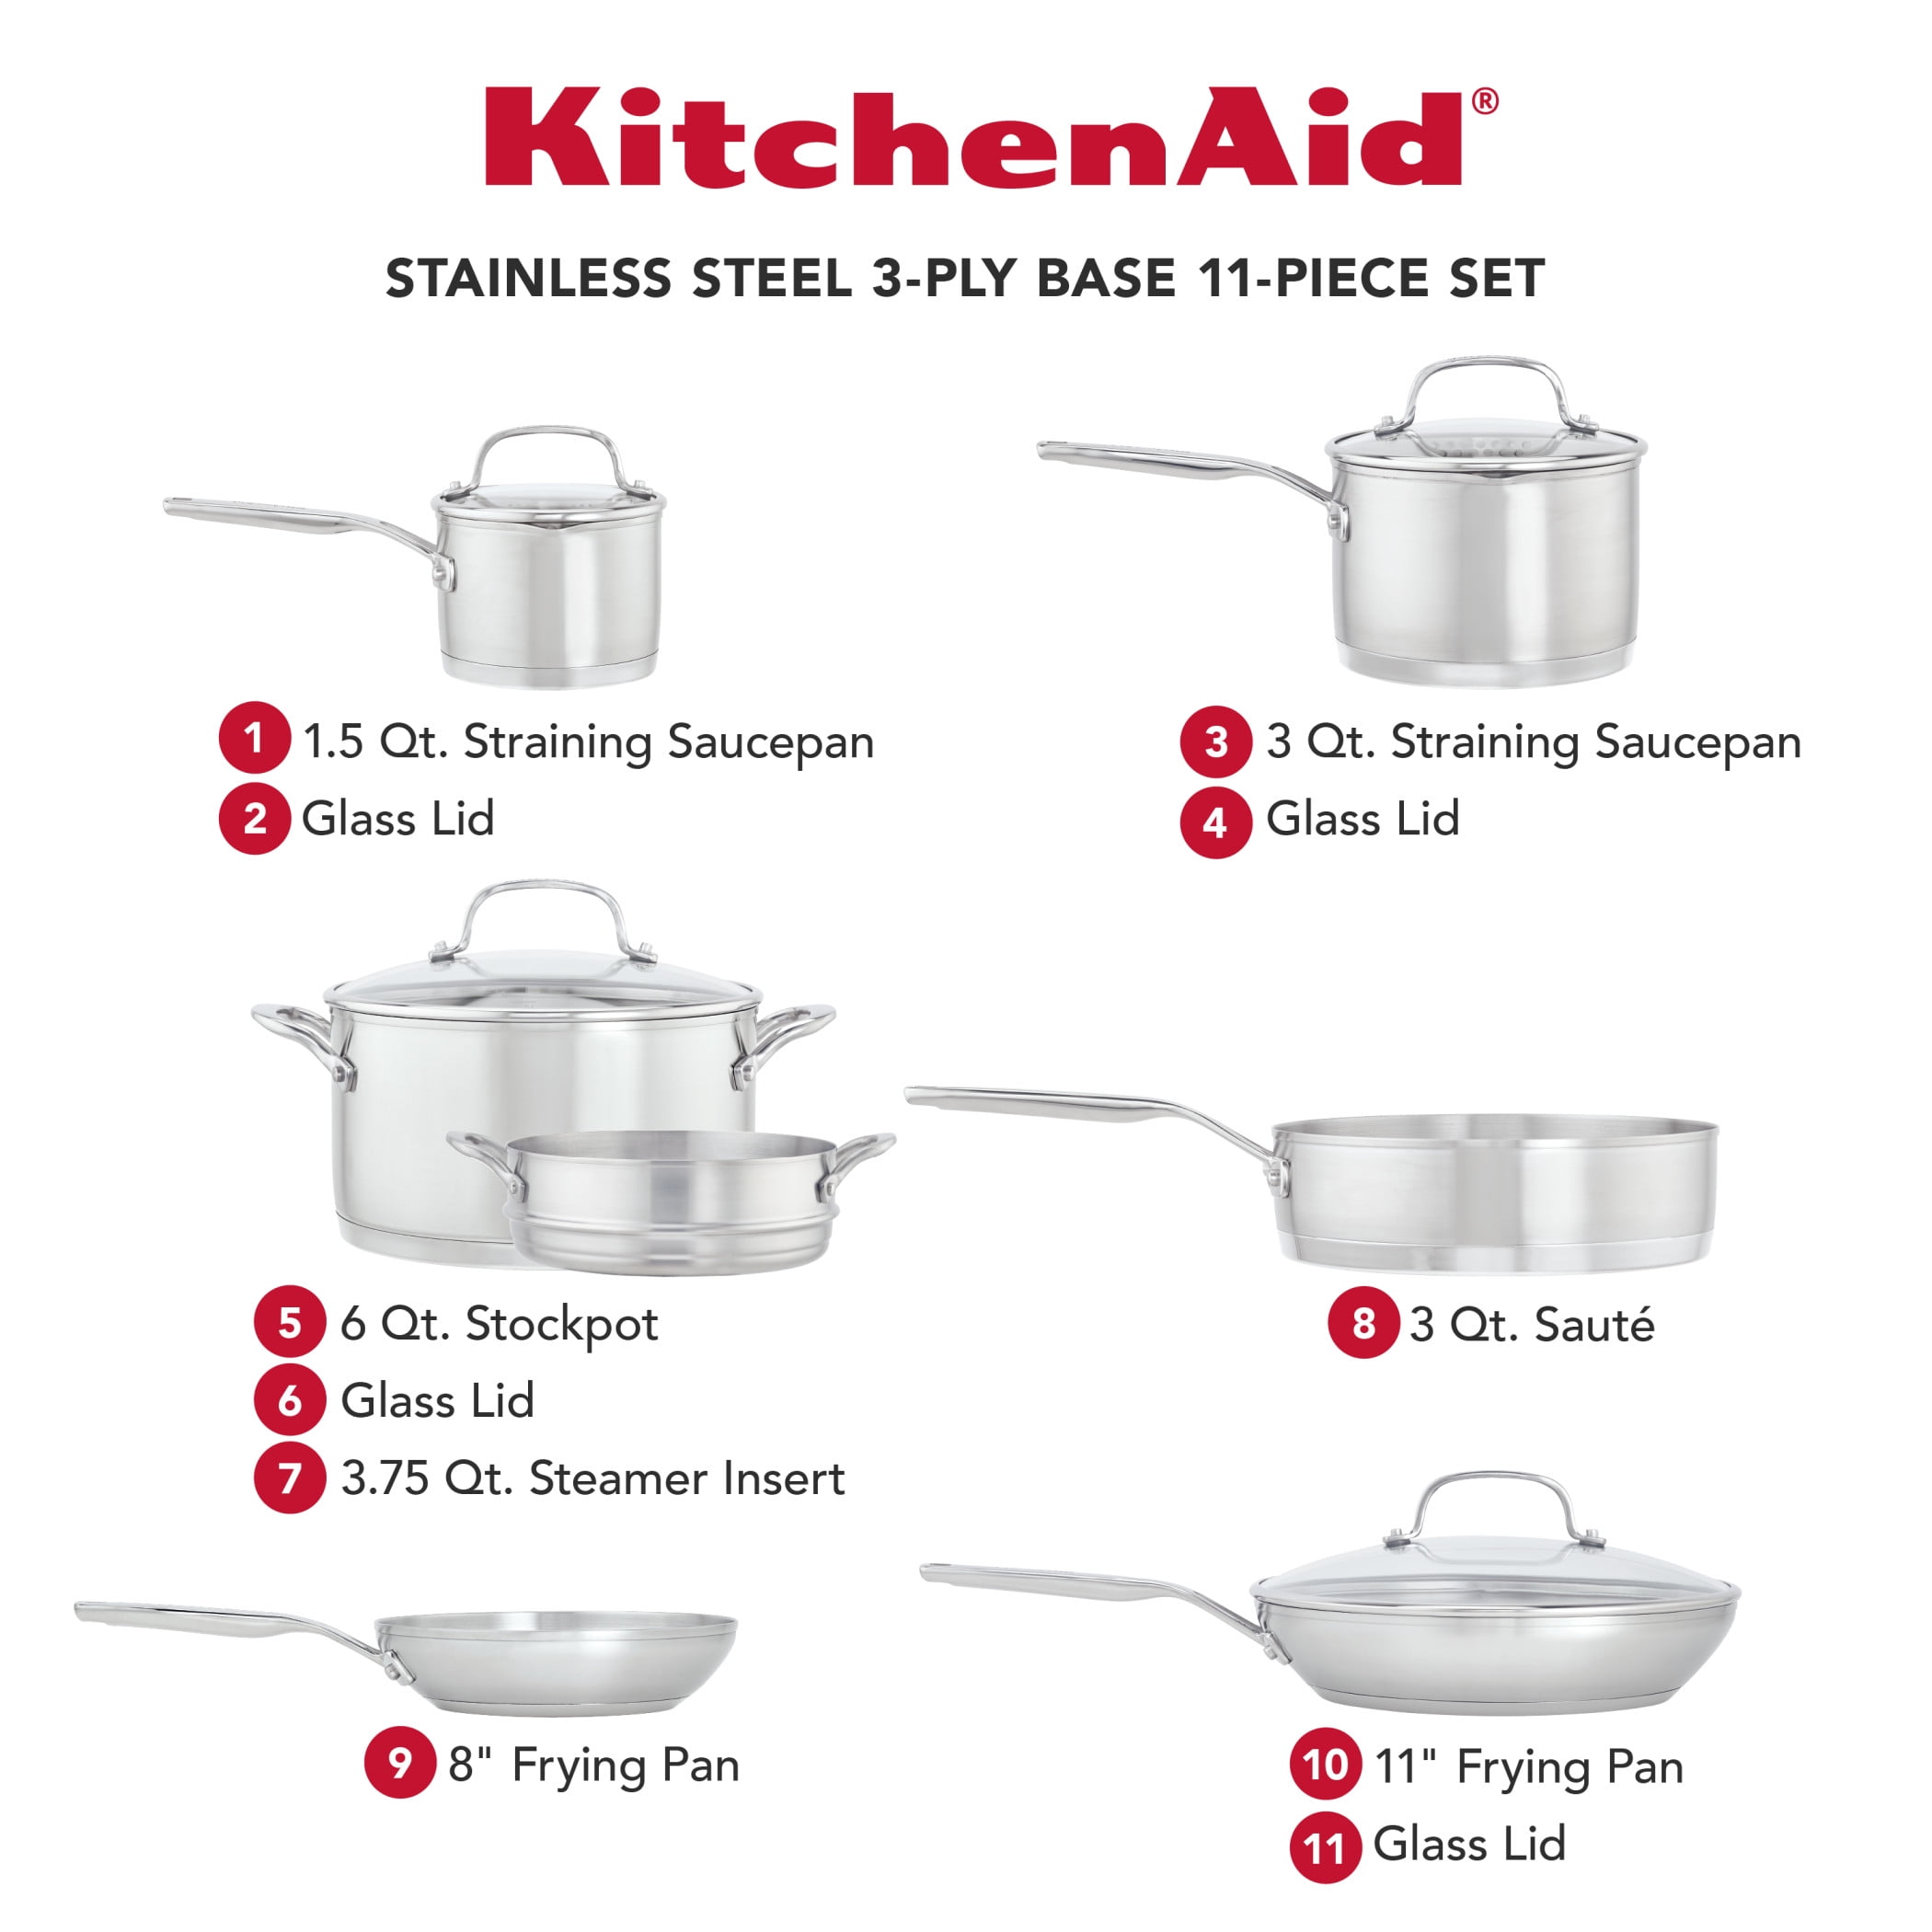 KitchenAid 11-piece 5-ply Clad Stainless Steel Cookware Set – RJP